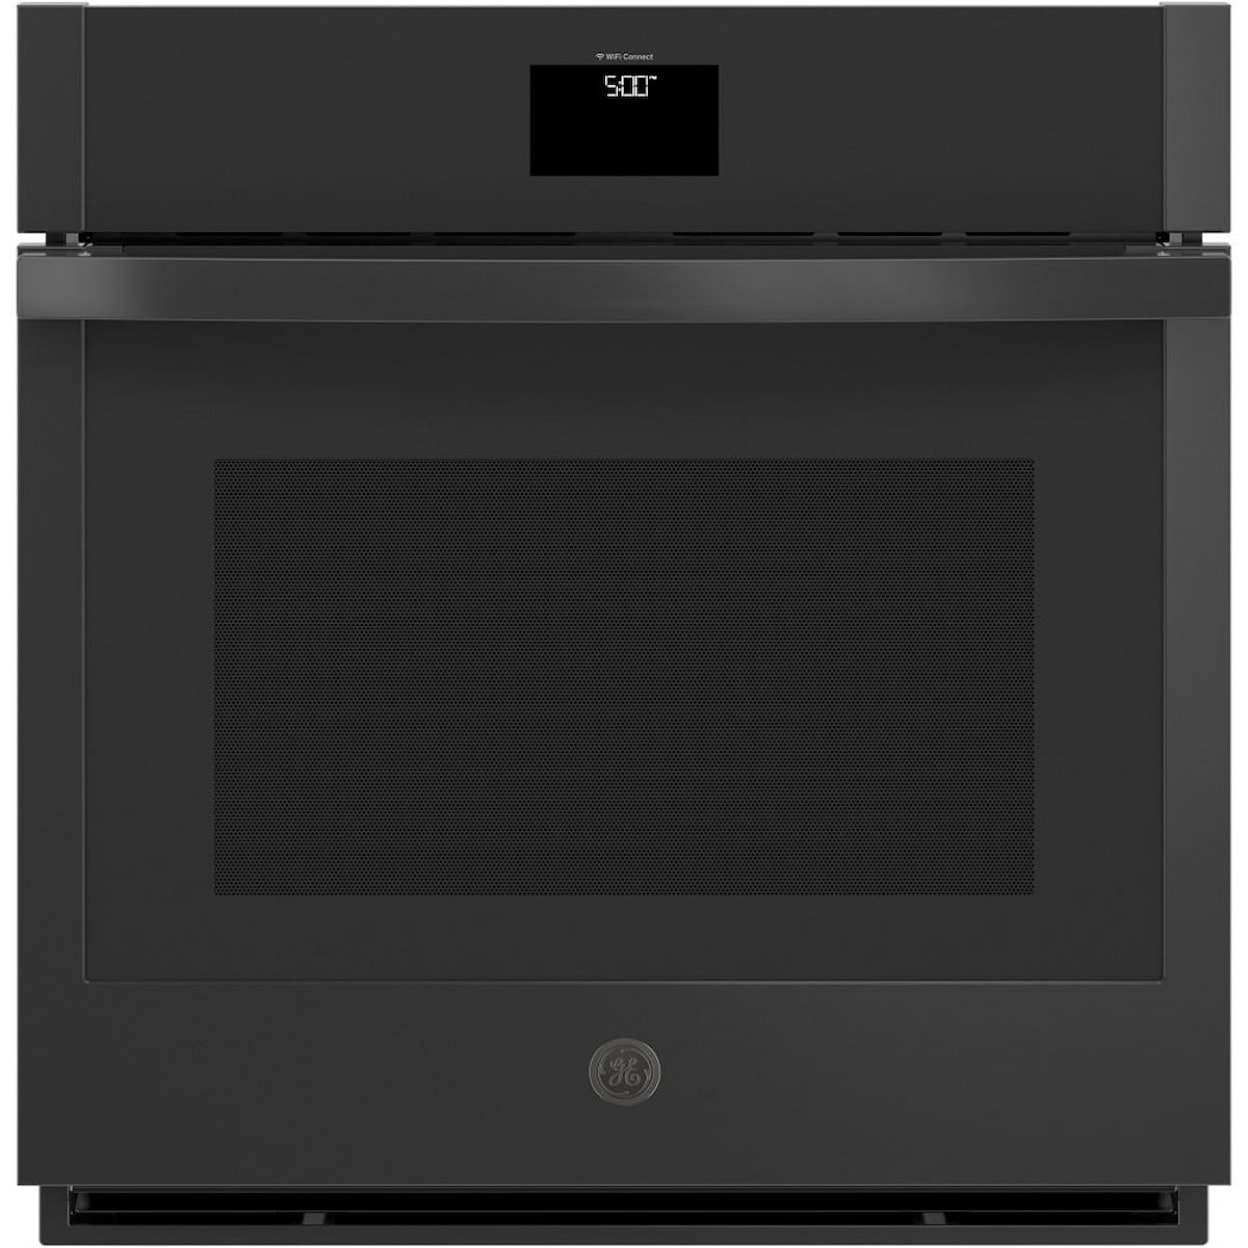 GE Appliances Wall Ovens Built-in Convection Single Wall oven Black